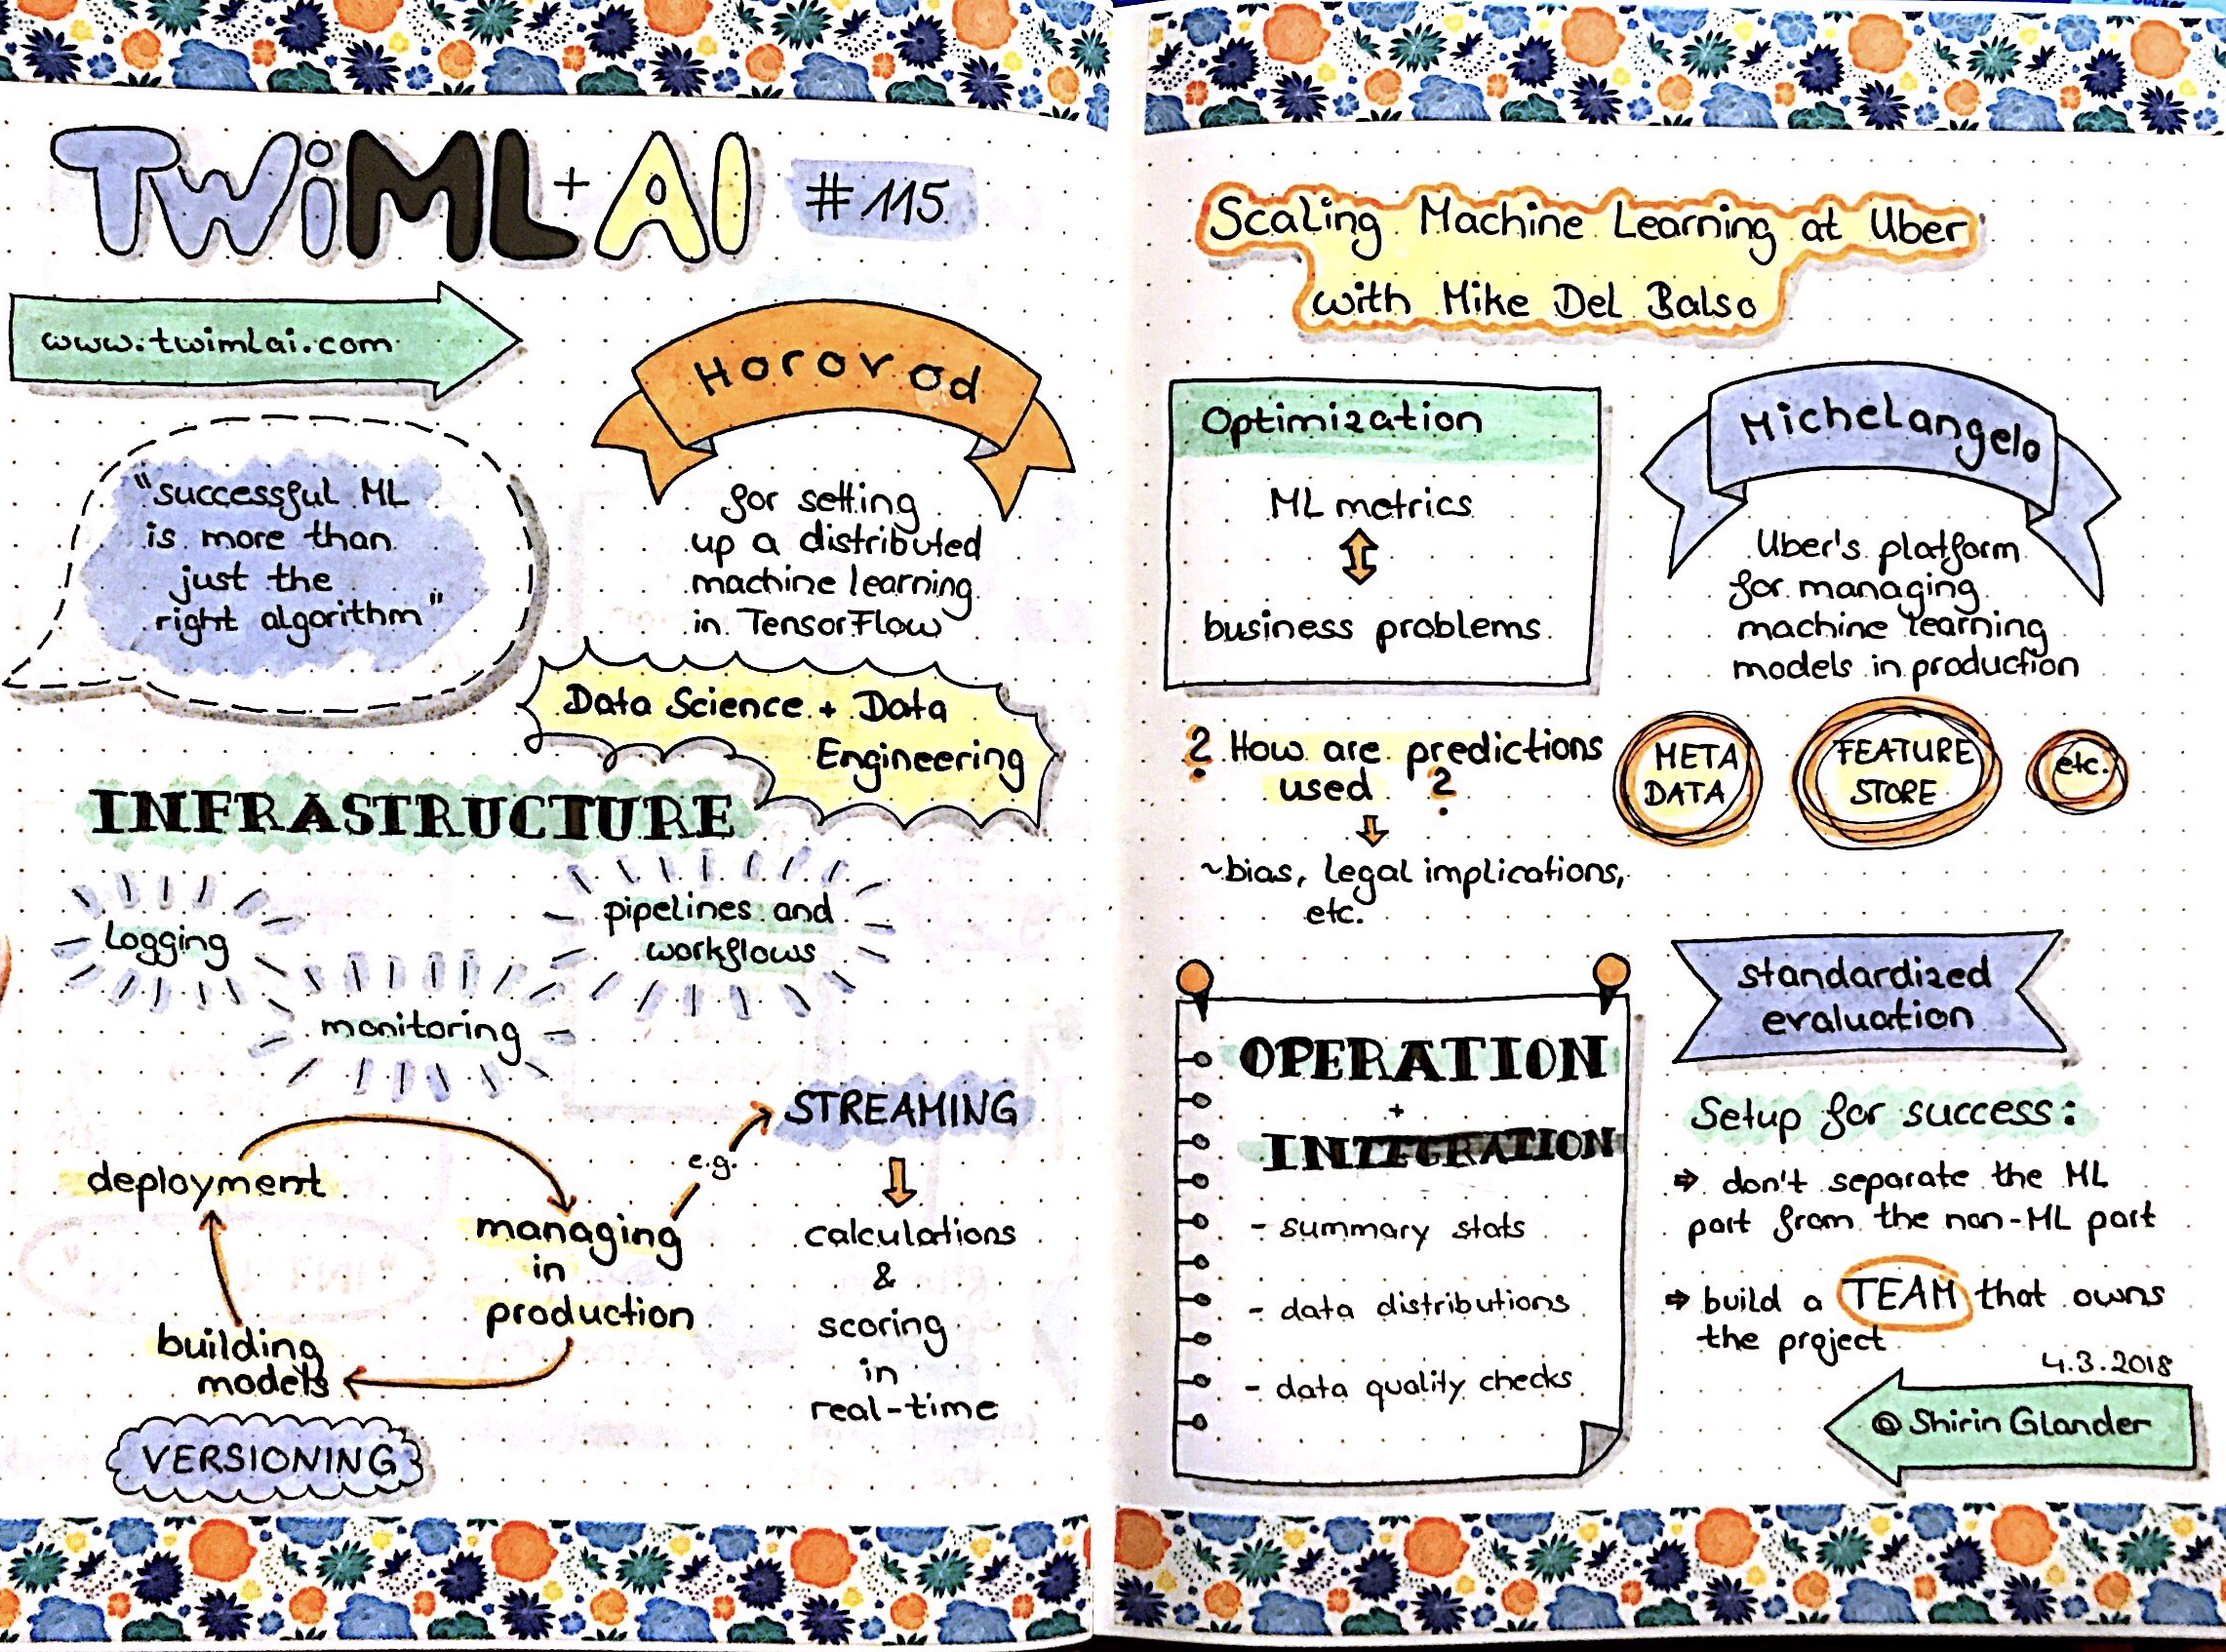 Sketchnotes from TWiMLAI talk #115: Scaling Machine Learning at Uber with Mike Del Balso